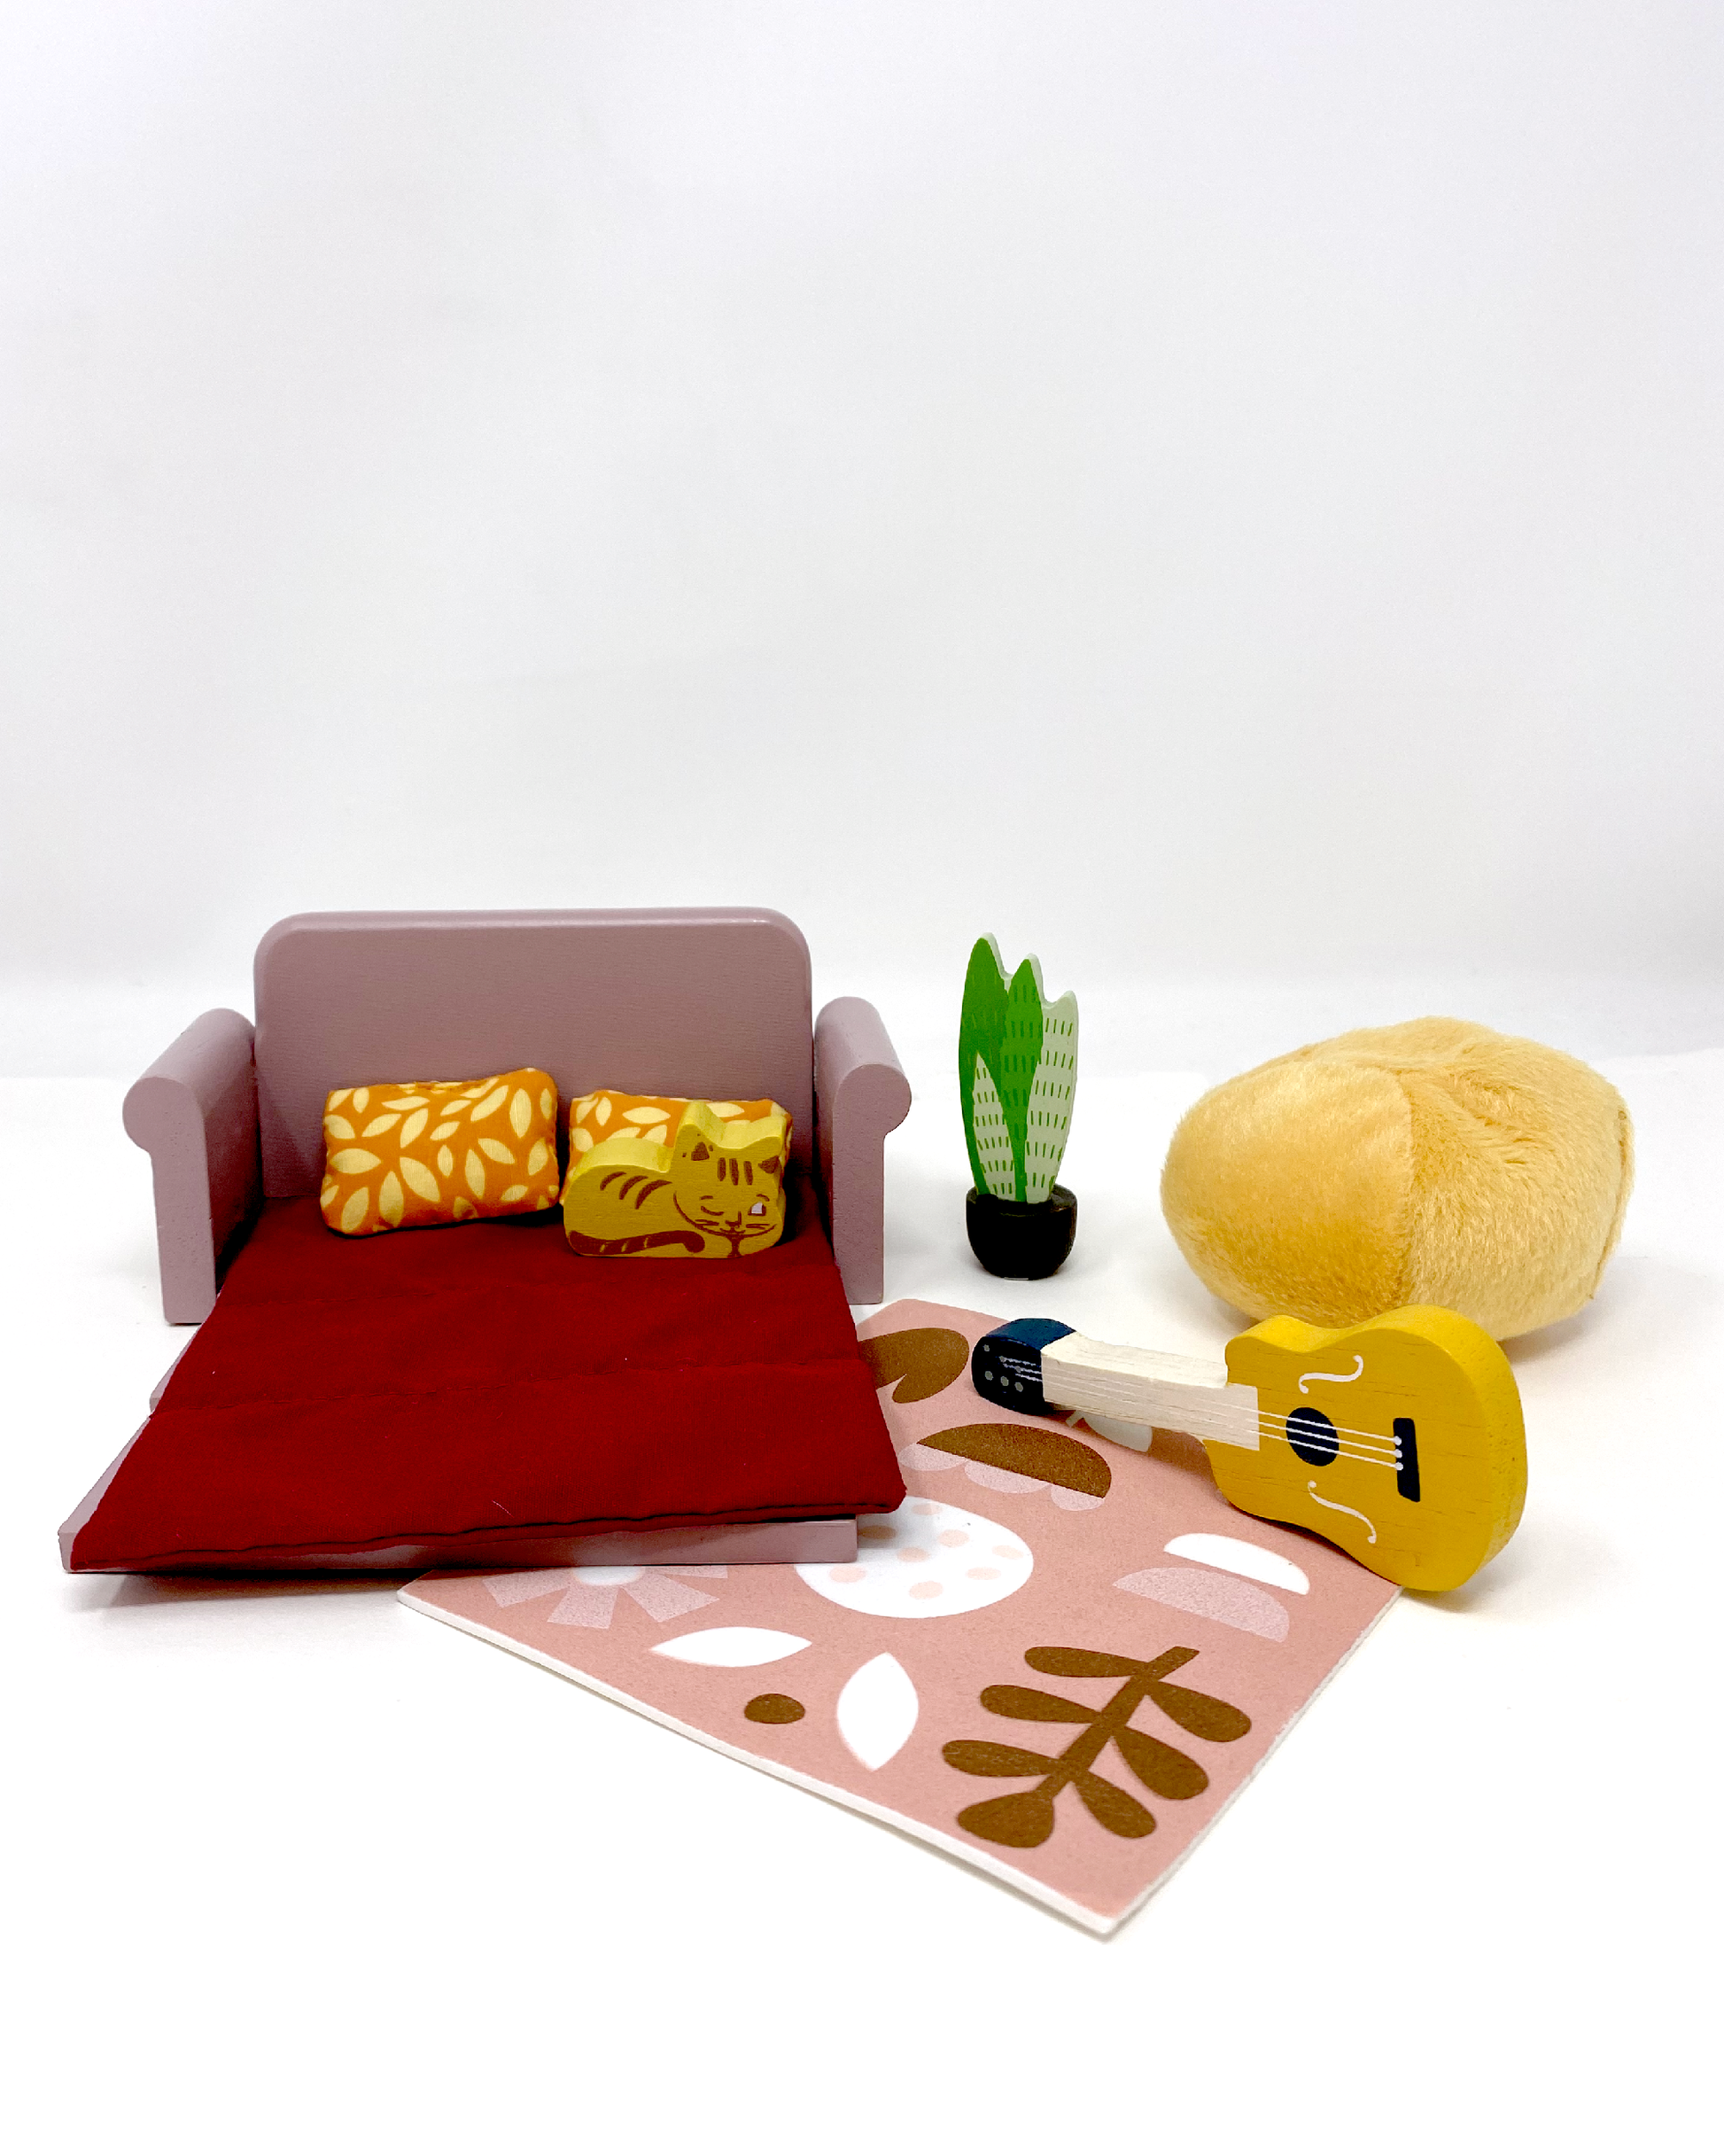 Dollhouse study furniture with clock, beanbag, couch, artist easel, and desk